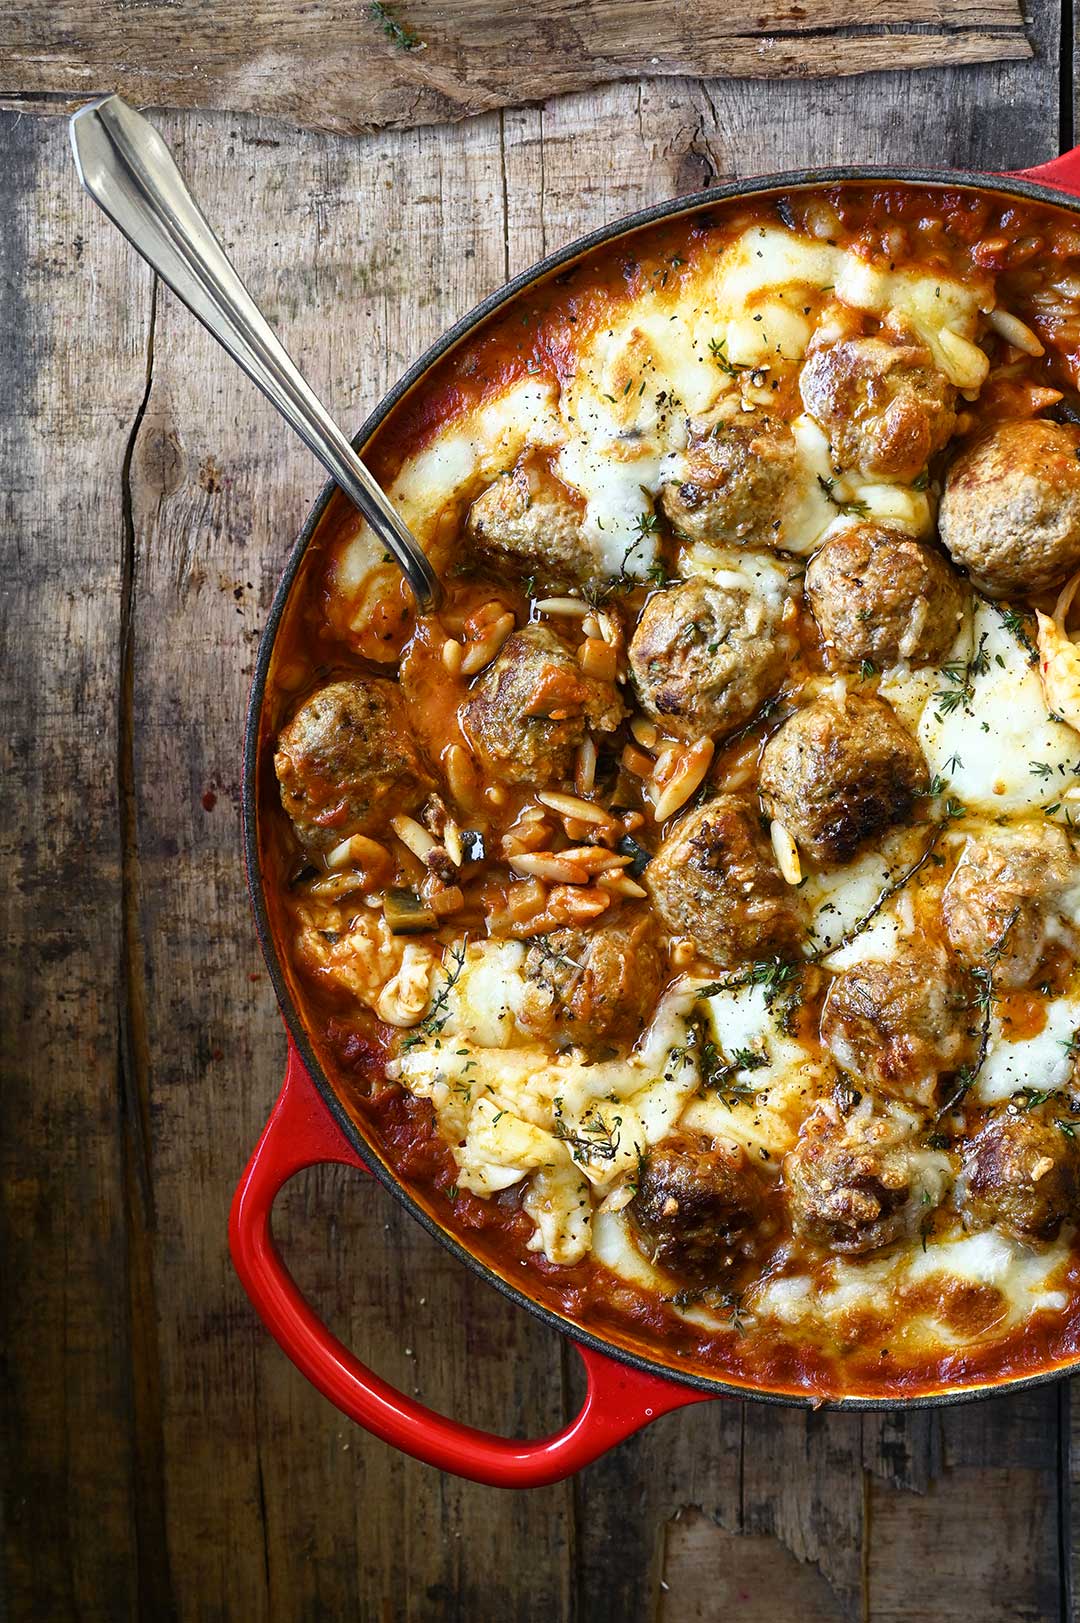 serving dumplings | Baked Meatballs with Orzo in Roasted Pepper Sauce